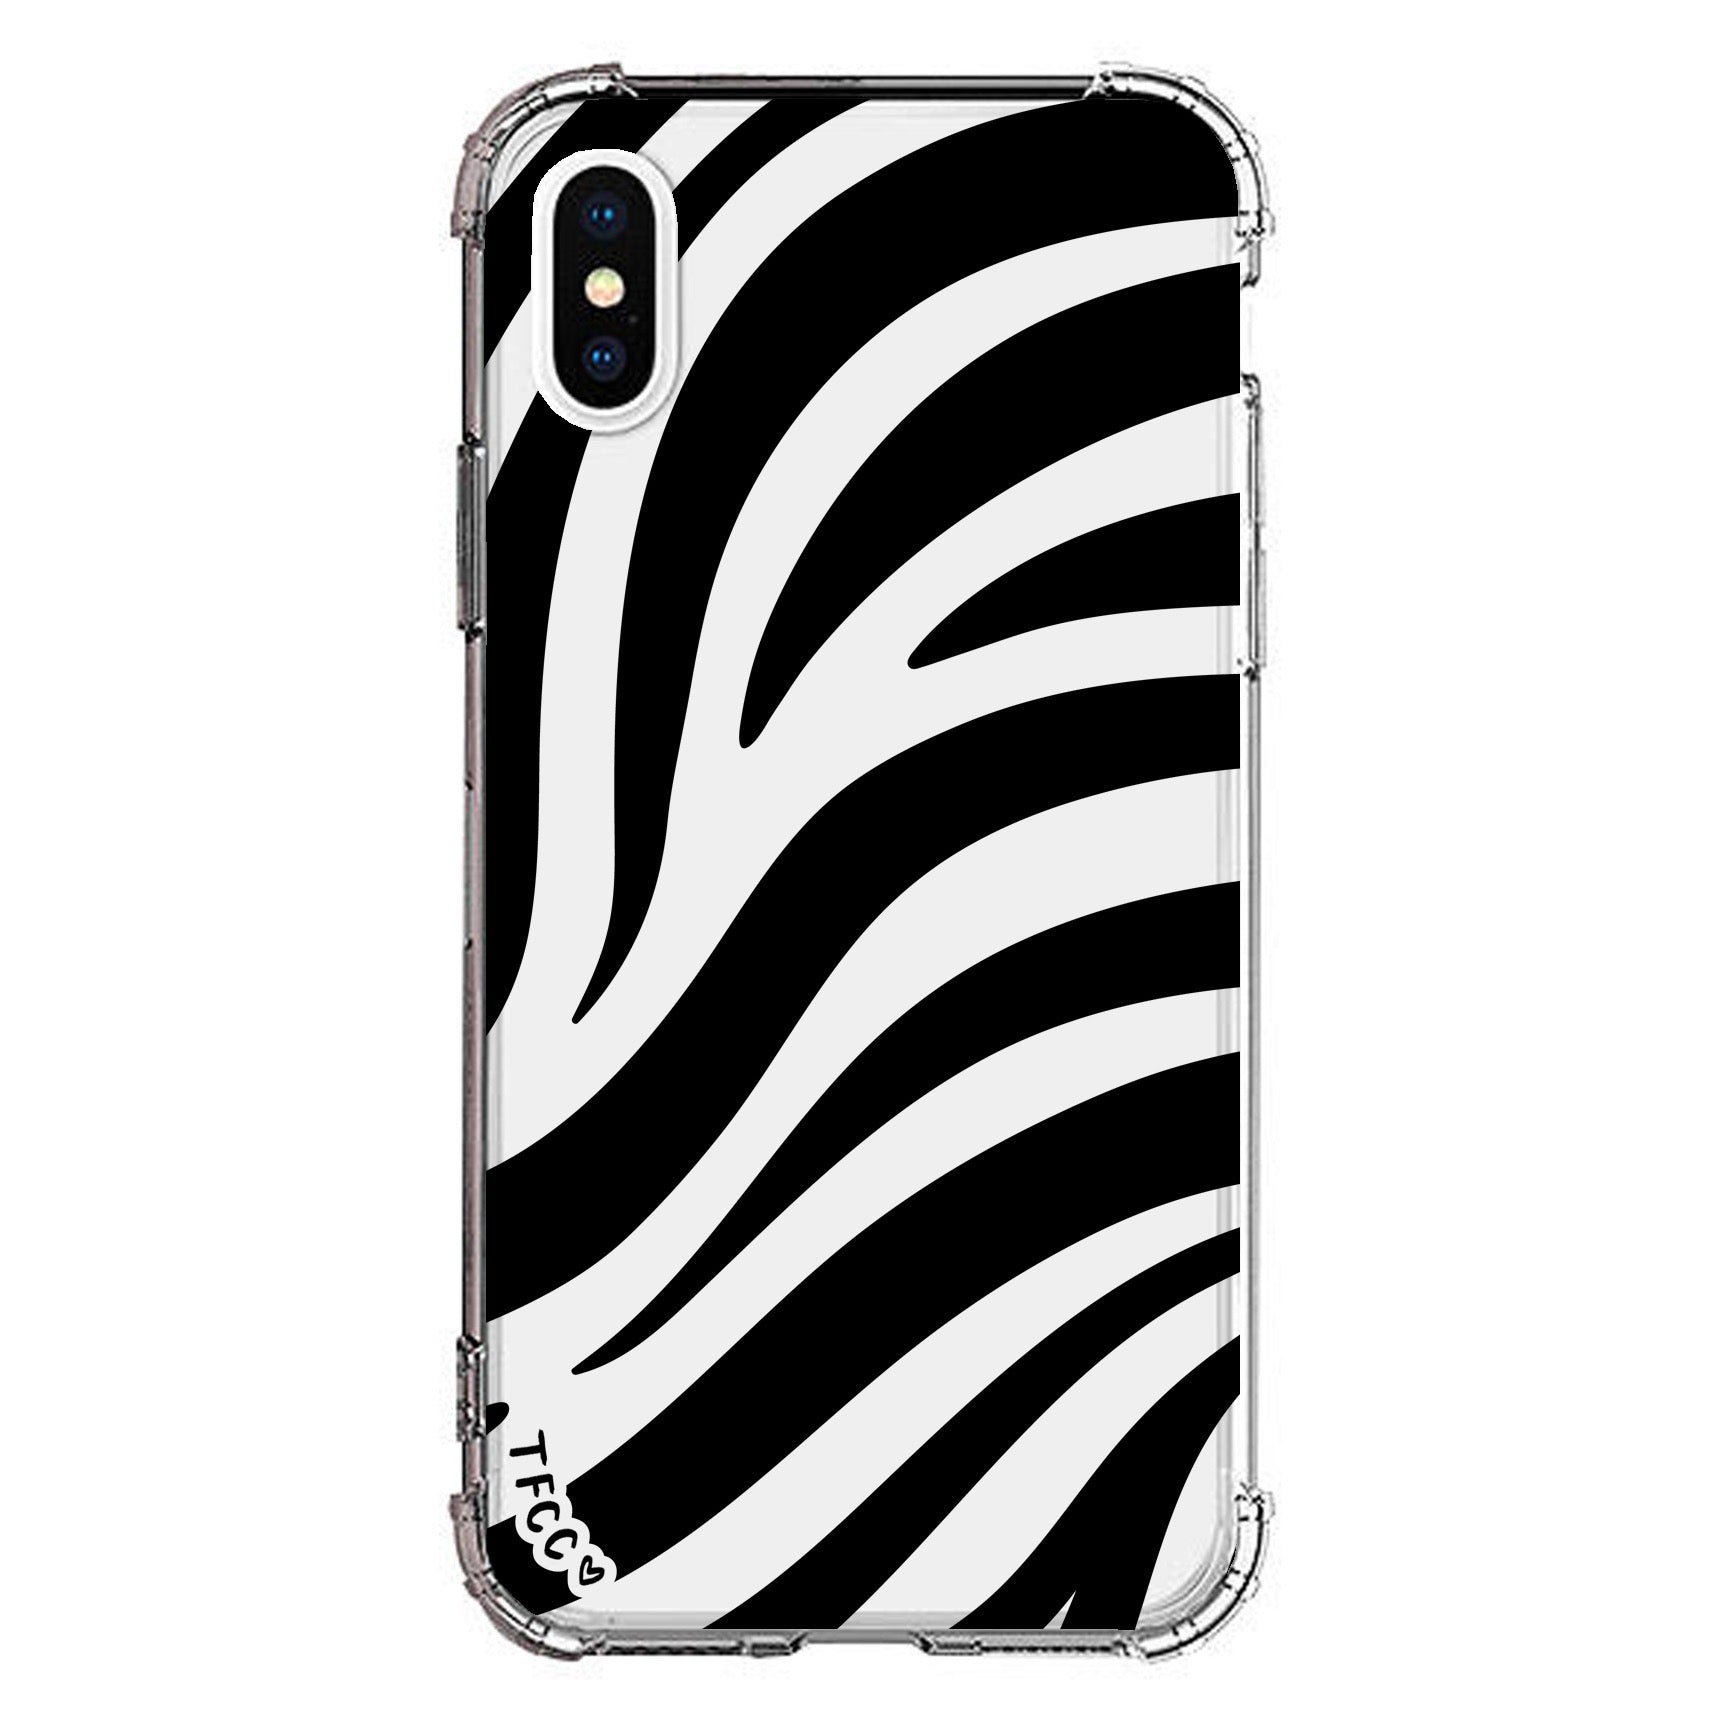 ZEBRA CLEAR CASE - thefonecasecompany